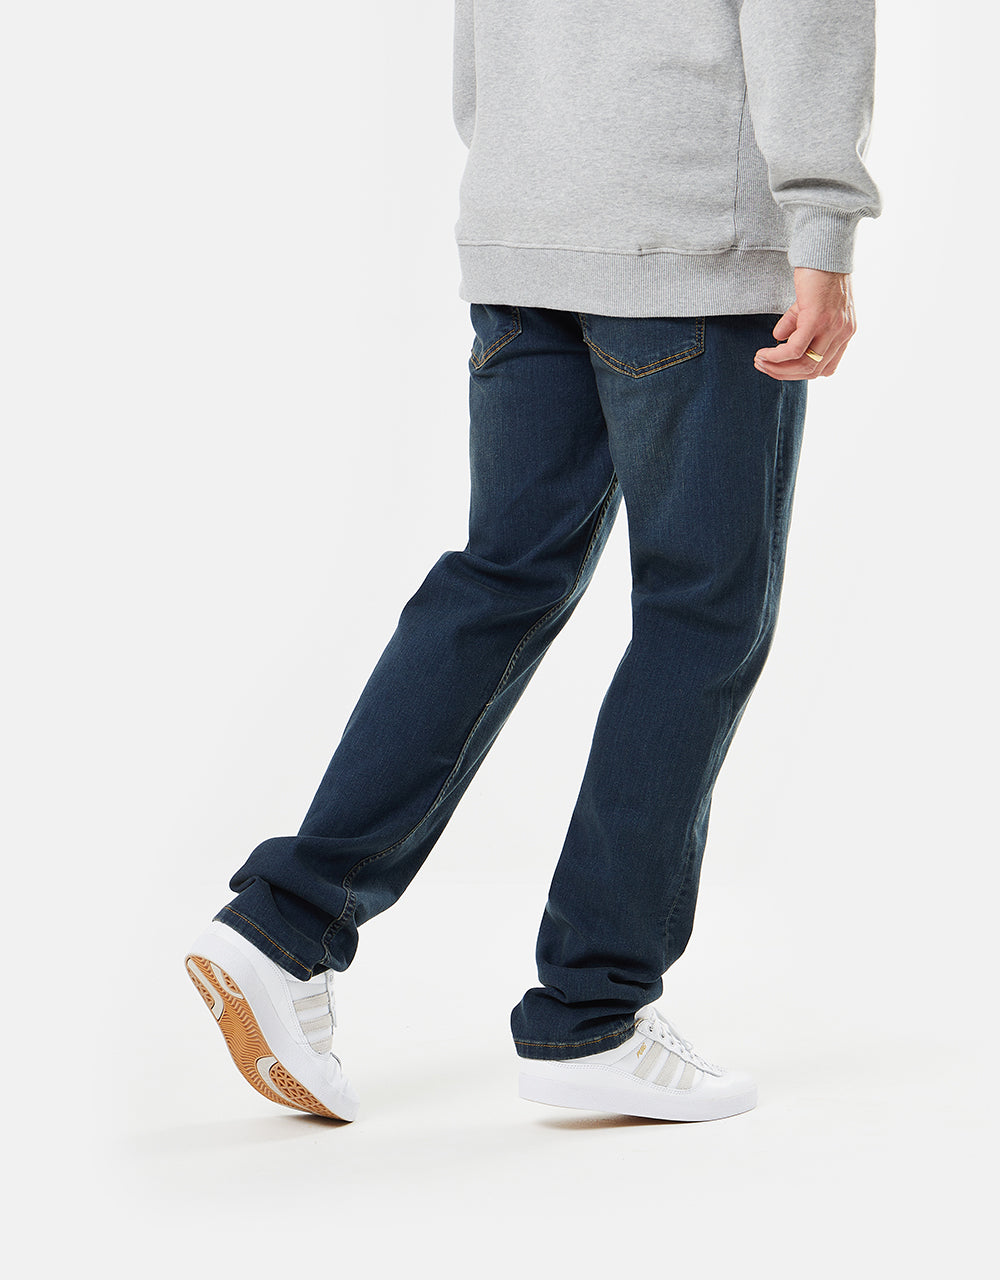 Route One Relaxed Denim Jeans - Washed Indigo